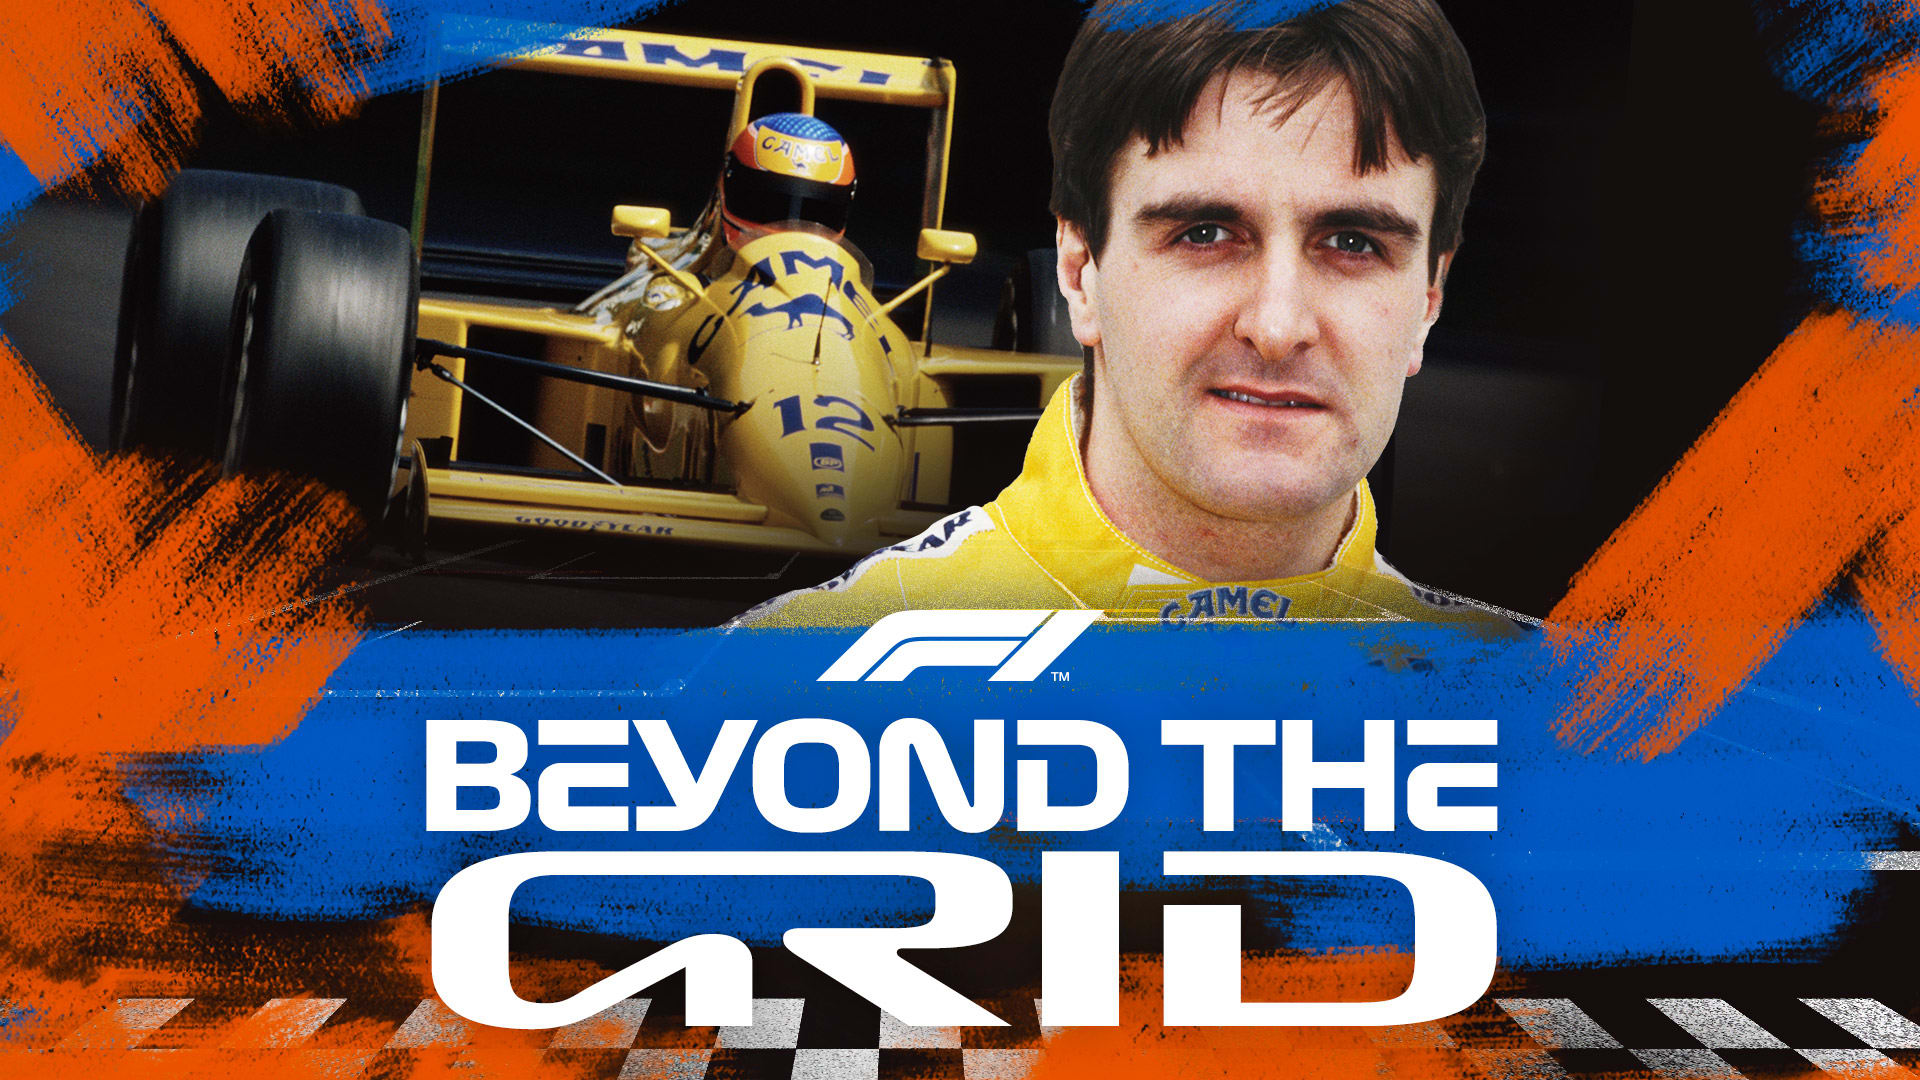 BEYOND THE GRID: Martin Donnelly on his Jerez crash, racing for Lotus, and friendship with Senna - Formula 1